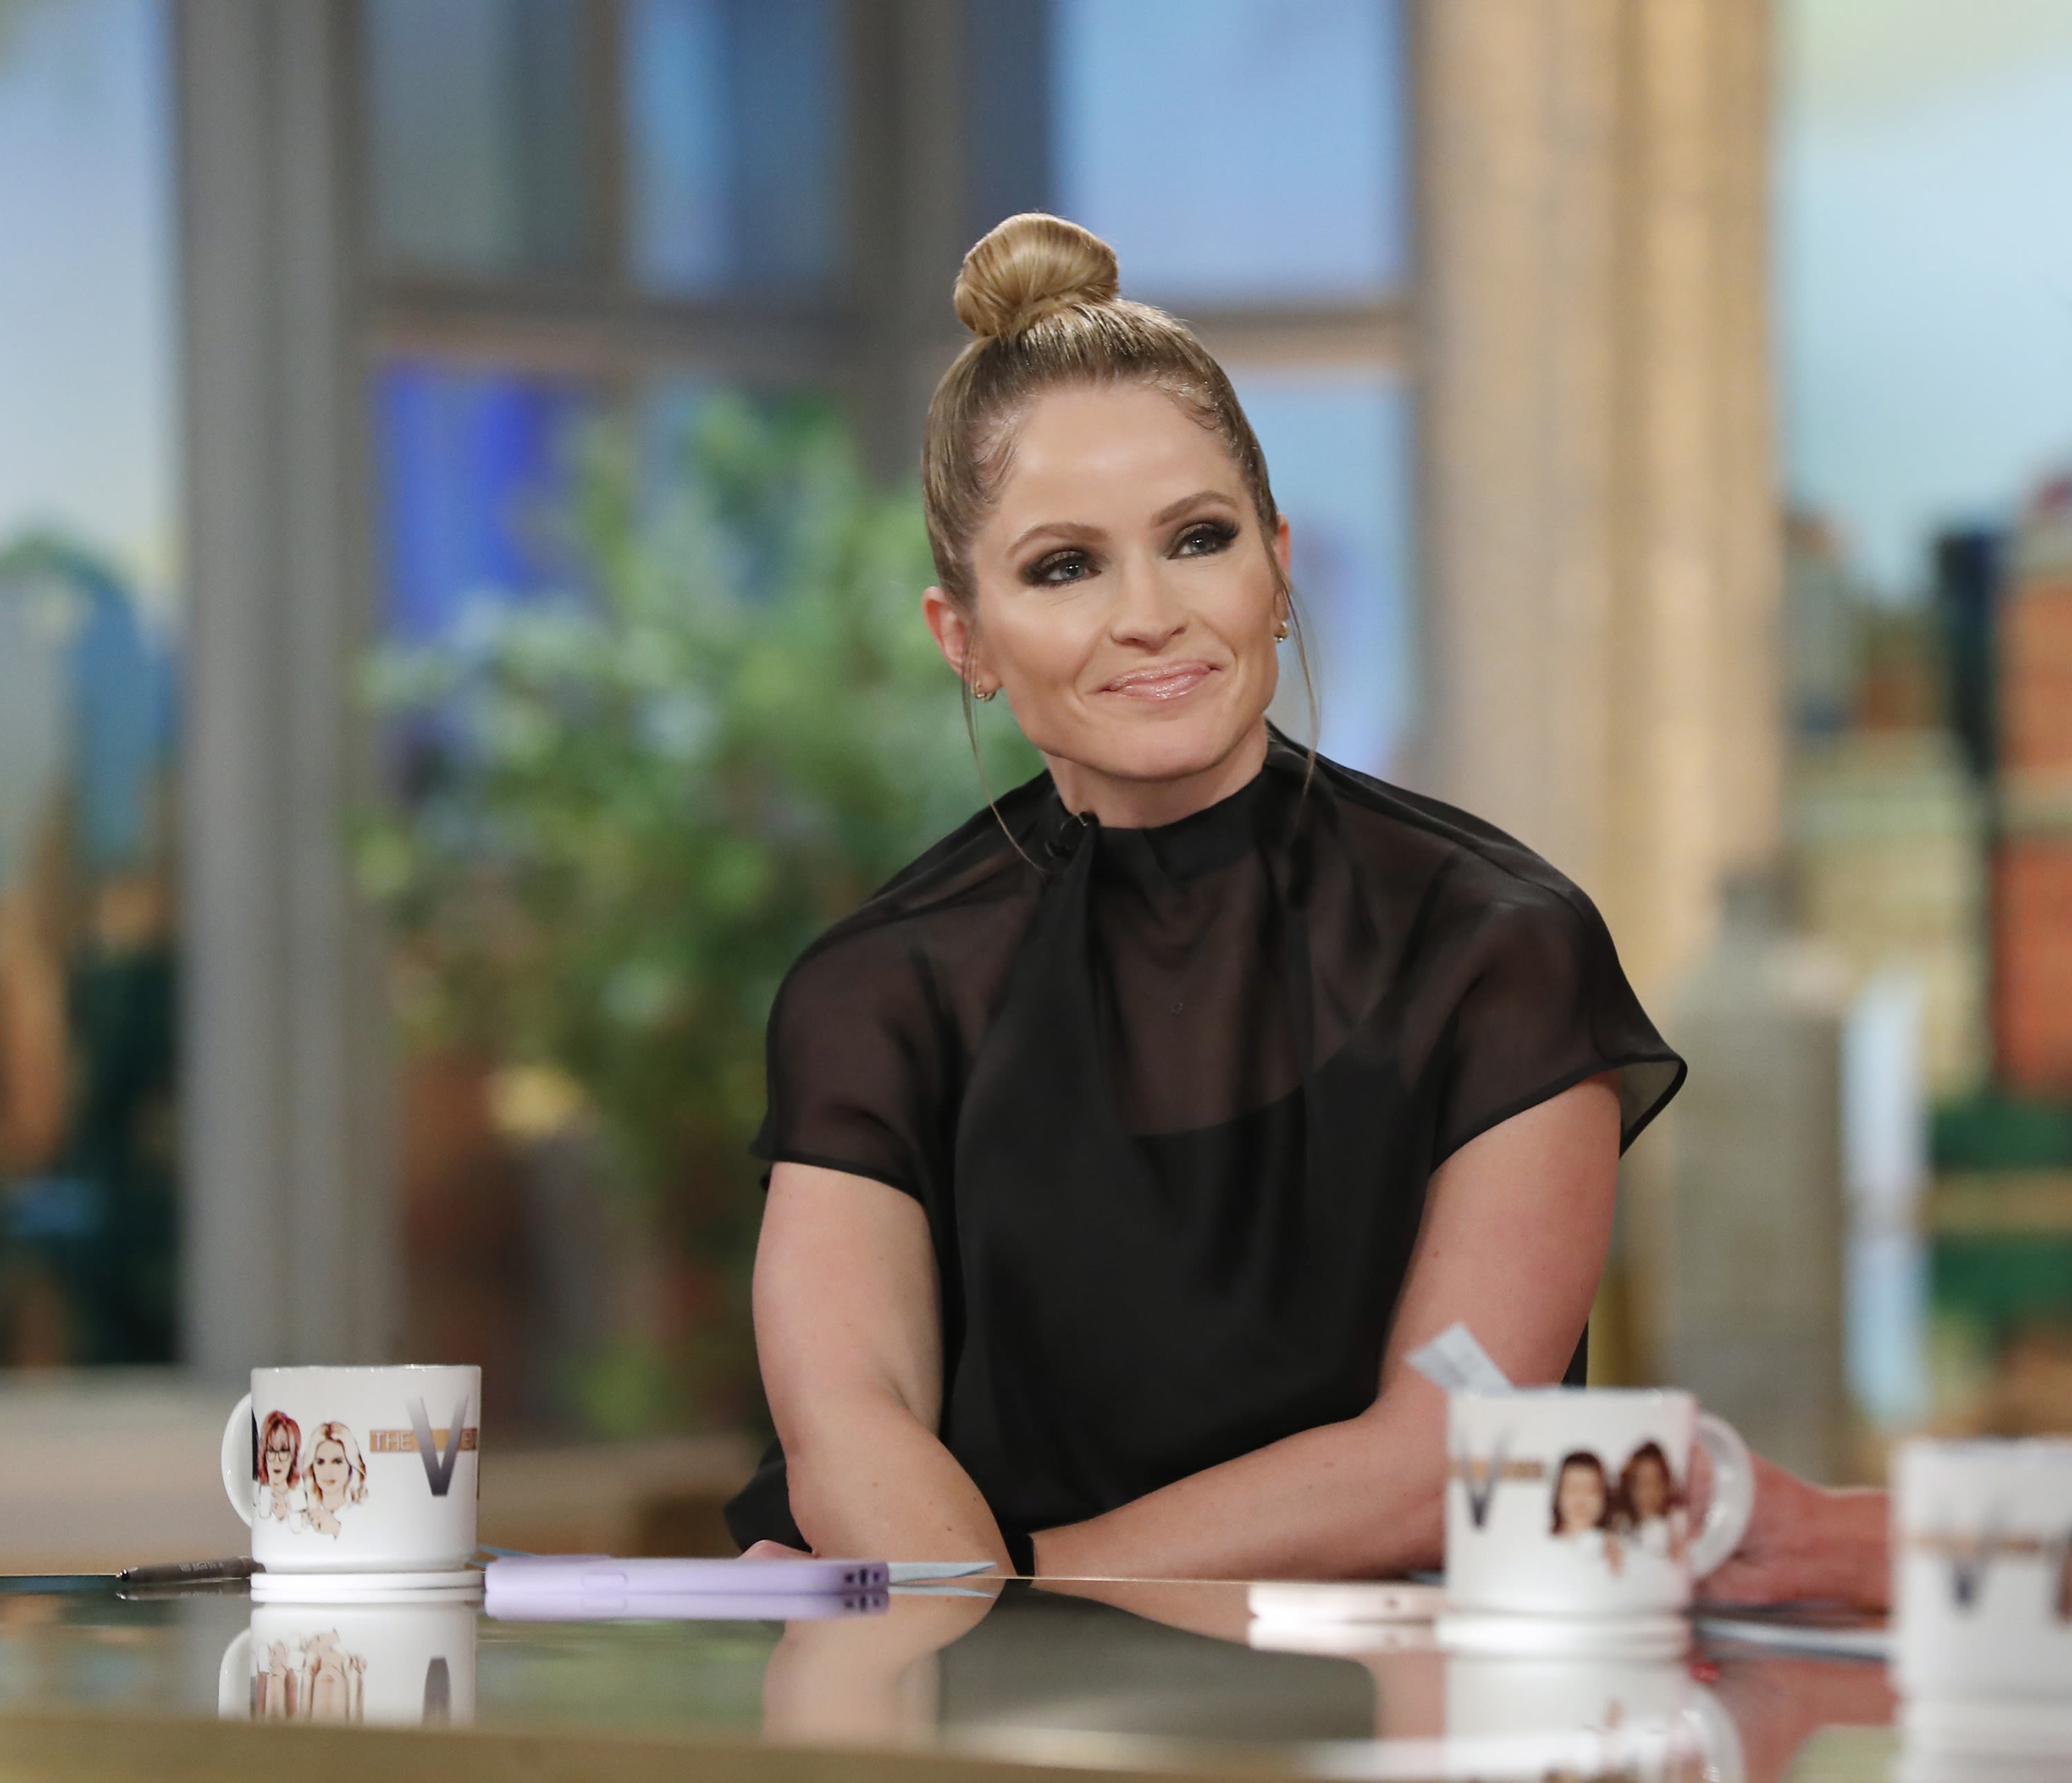 Sara Haines Shares How Her Personal Philosophies Have Changed Since Joining ‘The View’